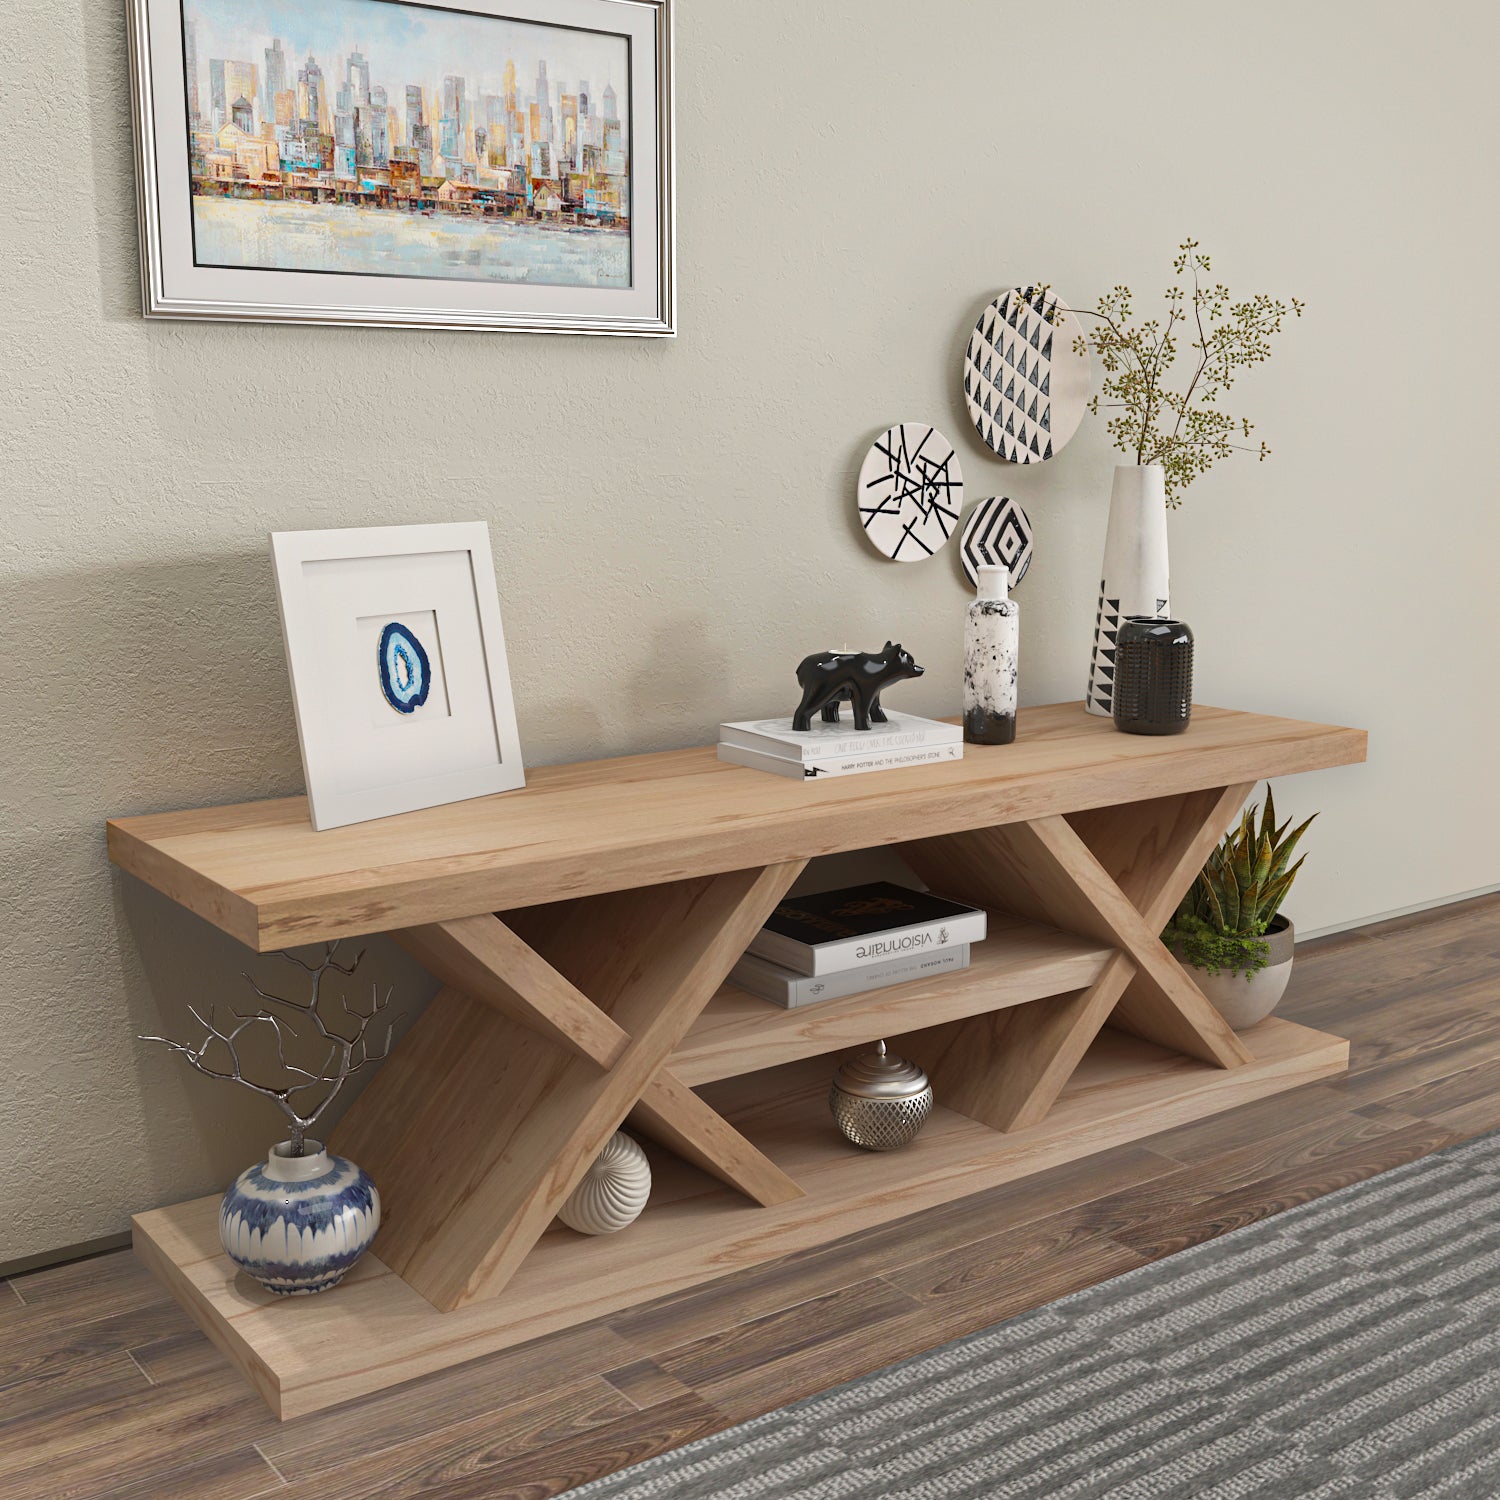 Massi 55'' Solid Wood TV Stand Console Table